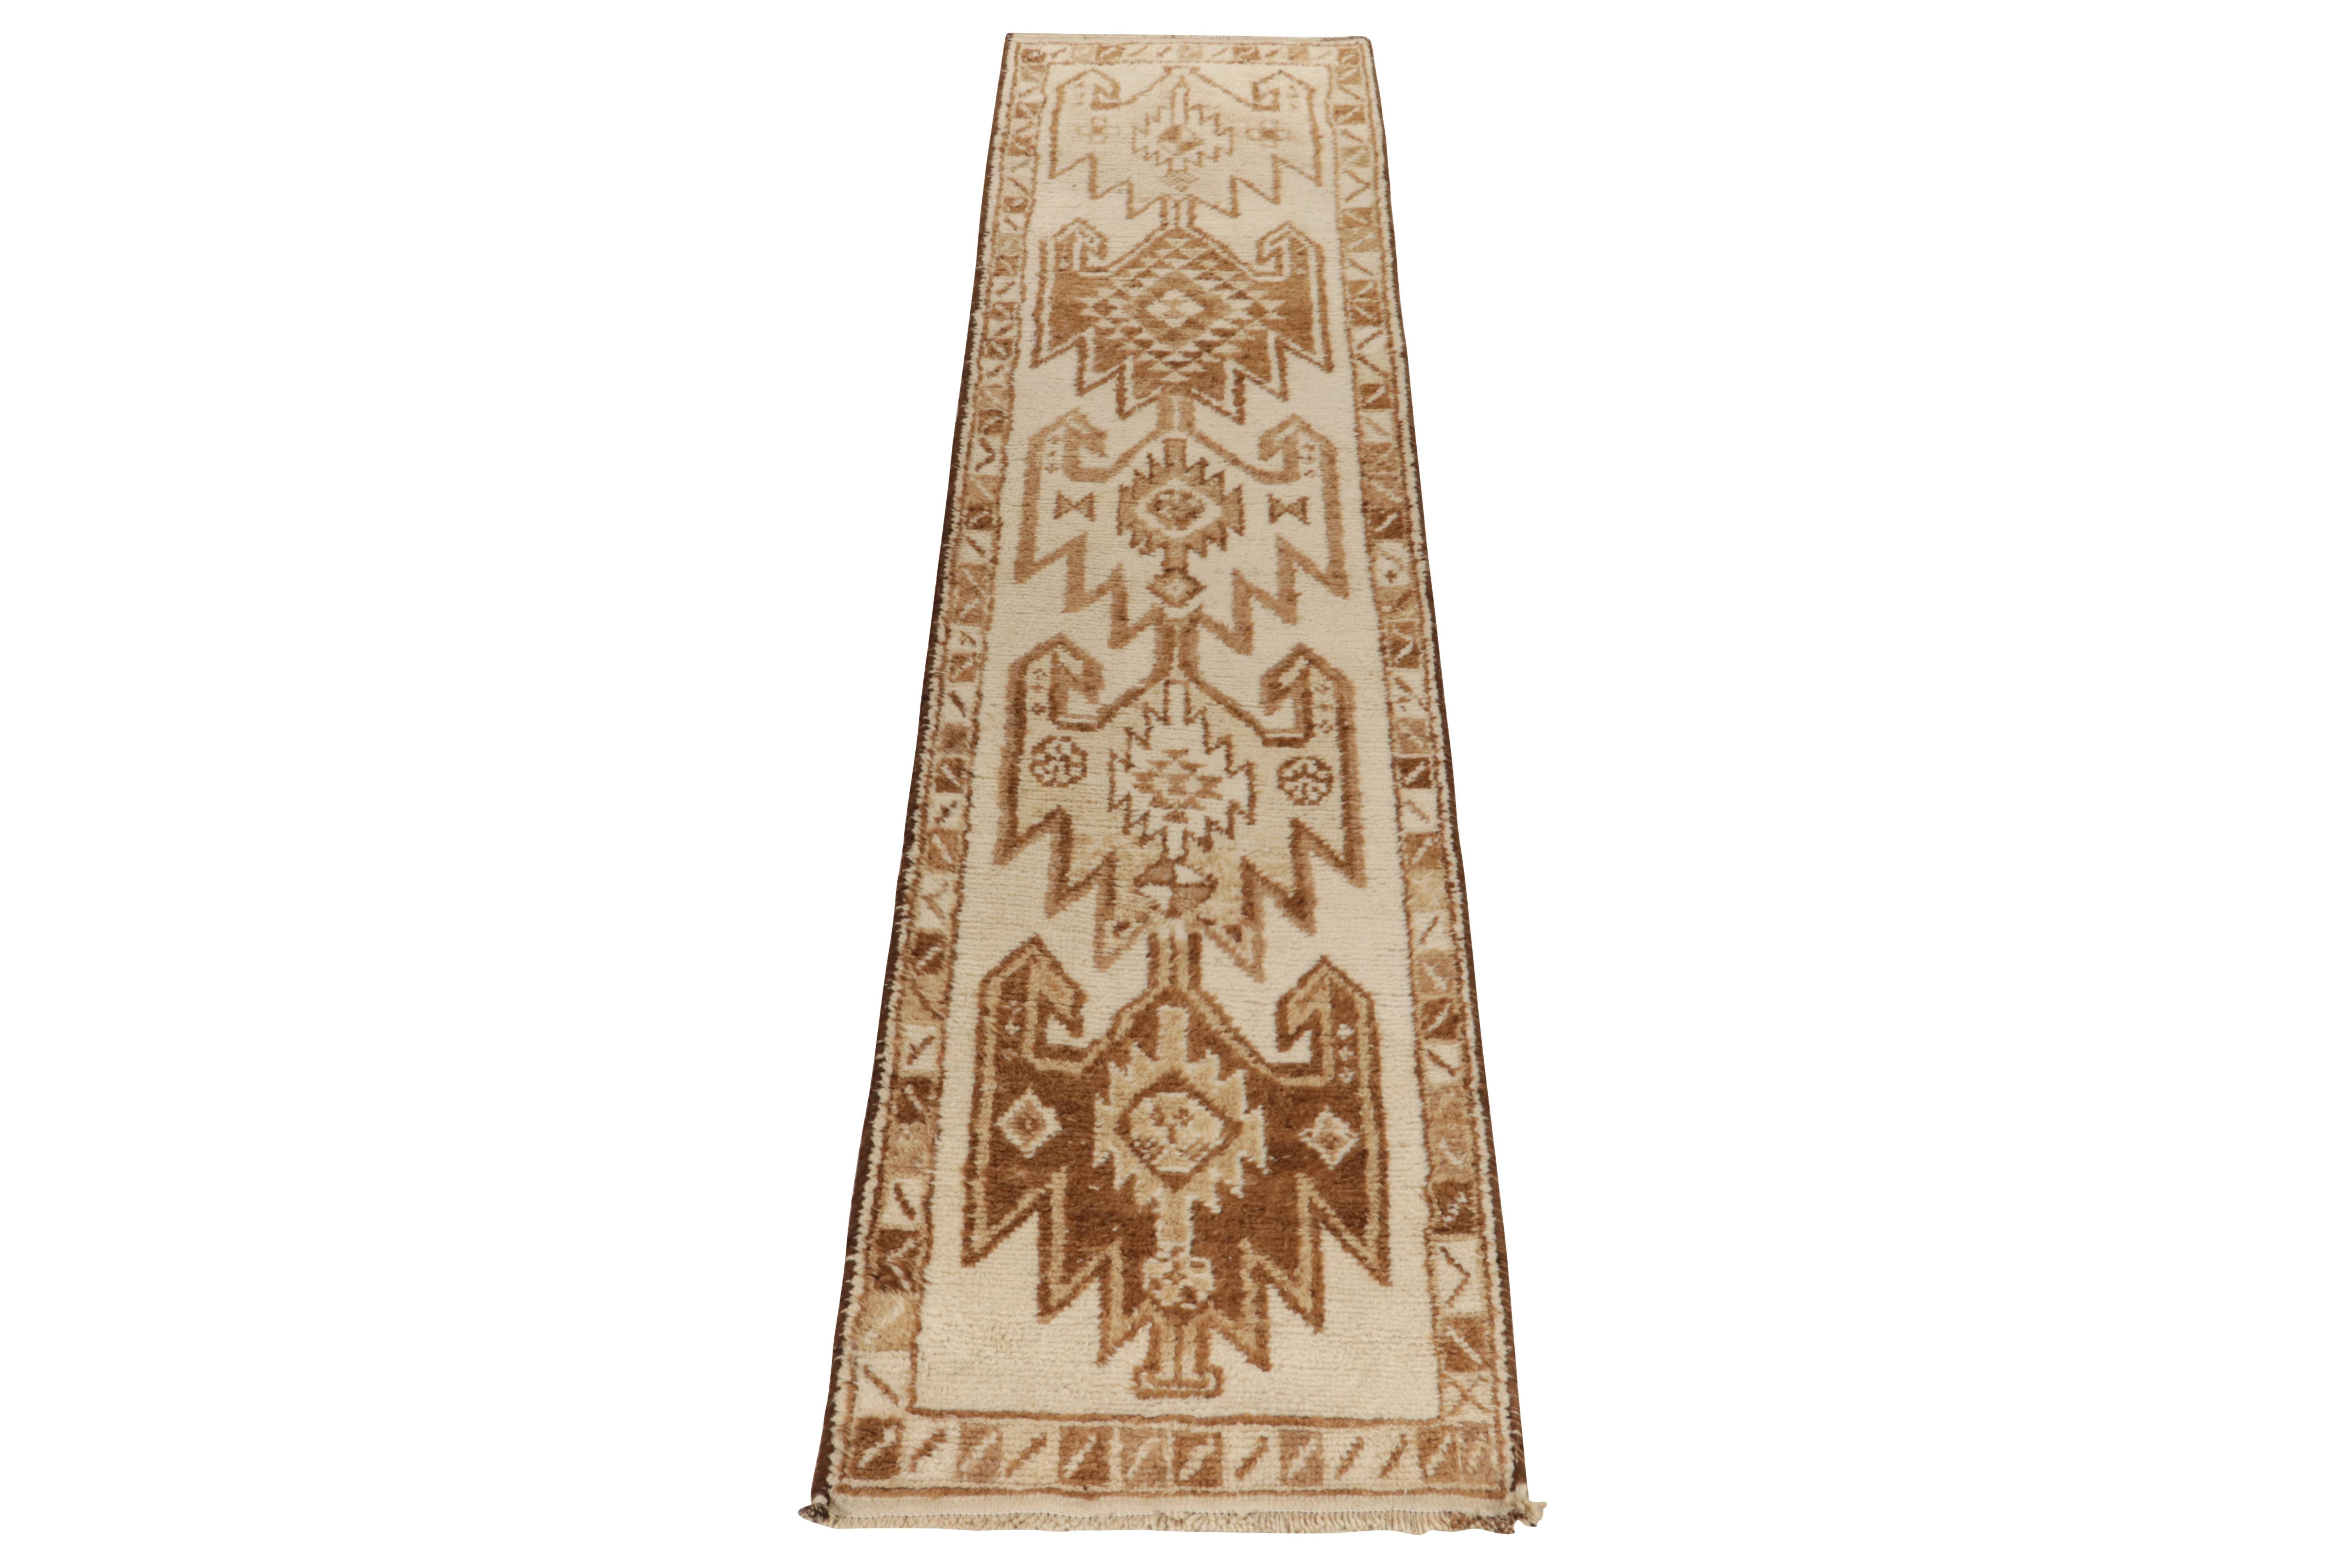 From Rug & Kilim’s vintage selections, a 3x13 hand-knotted wool runner of uniquely bright hues and lush, shag wool texture. 

This 1950s tribal piece showcases traditional motifs sitting peacefully like medallions on the field in creamy white &